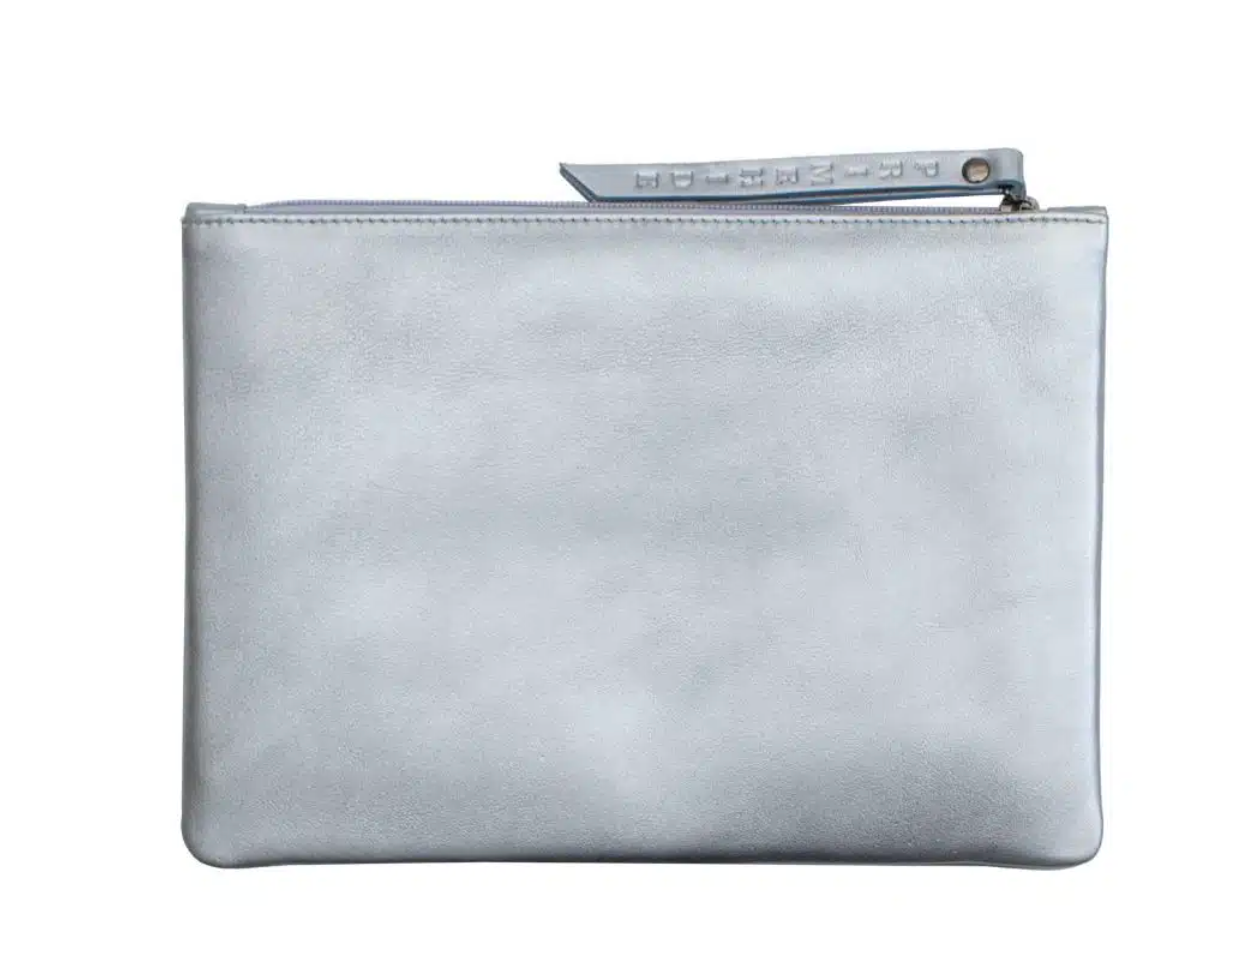 Silver Leather Pouch